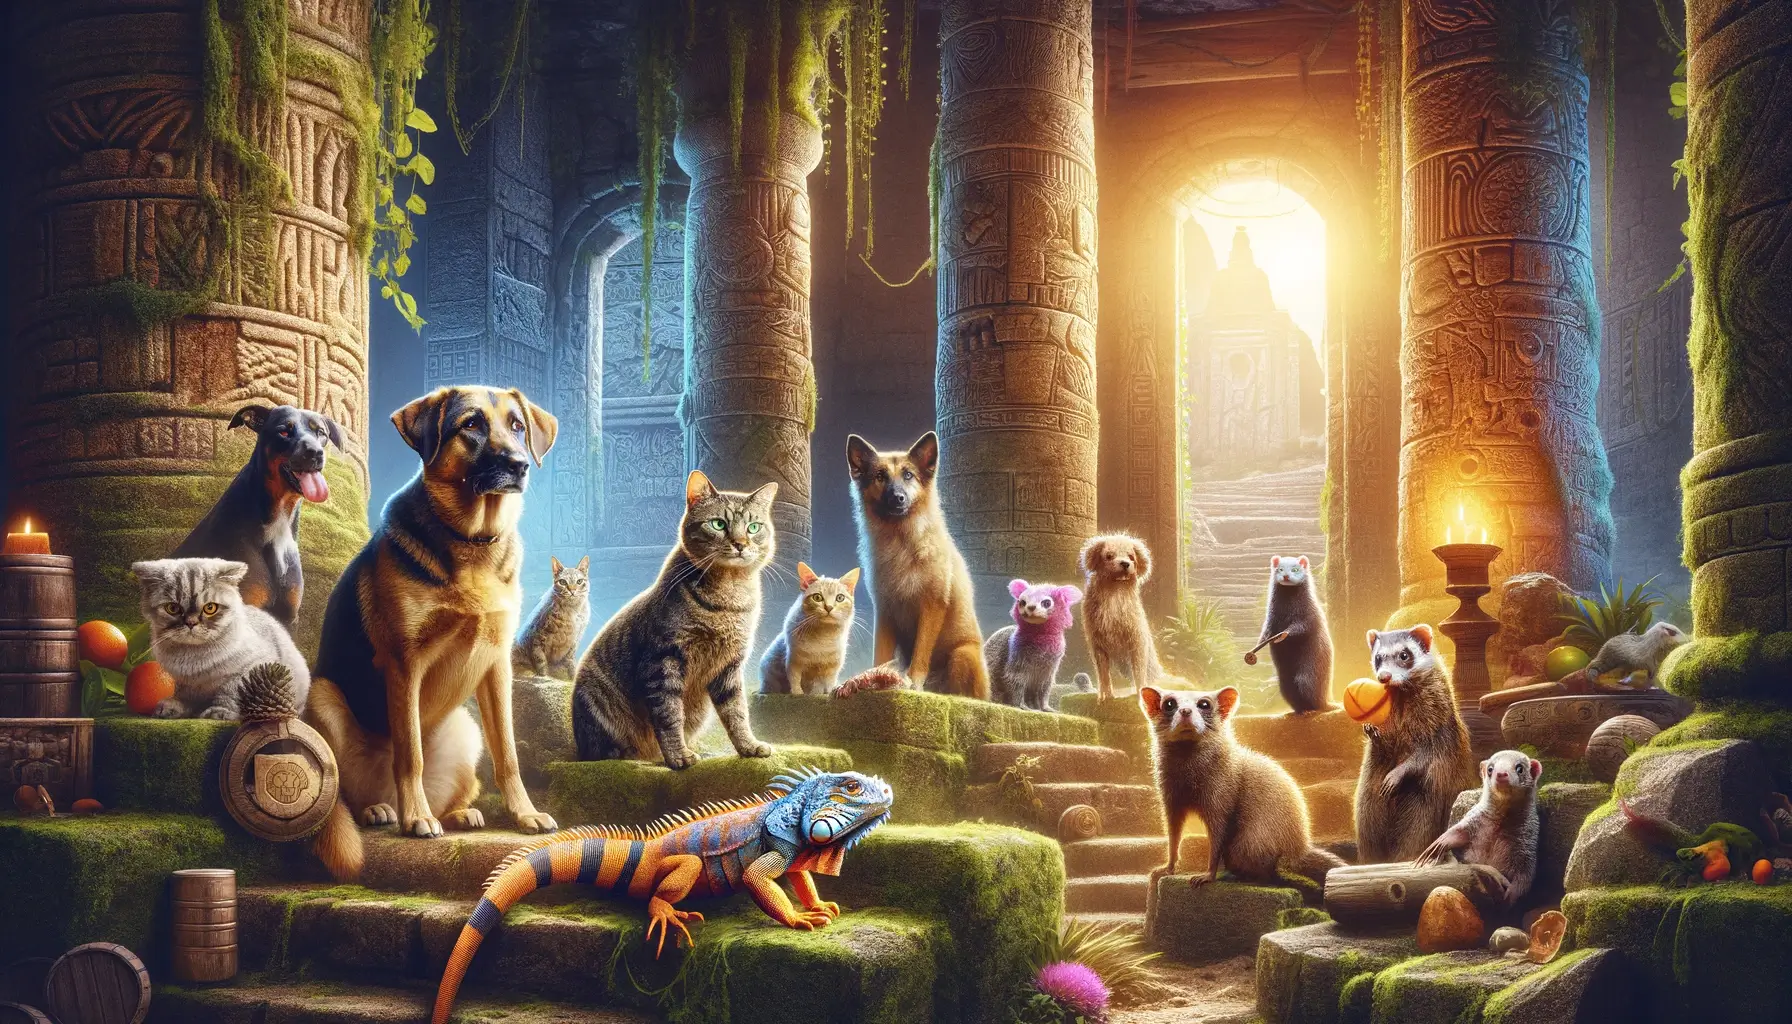 A diverse assembly of pets, including dogs, cats, ferrets, and an iguana, set in an ancient, vine-entwined temple, bathed in the golden light of adventure.